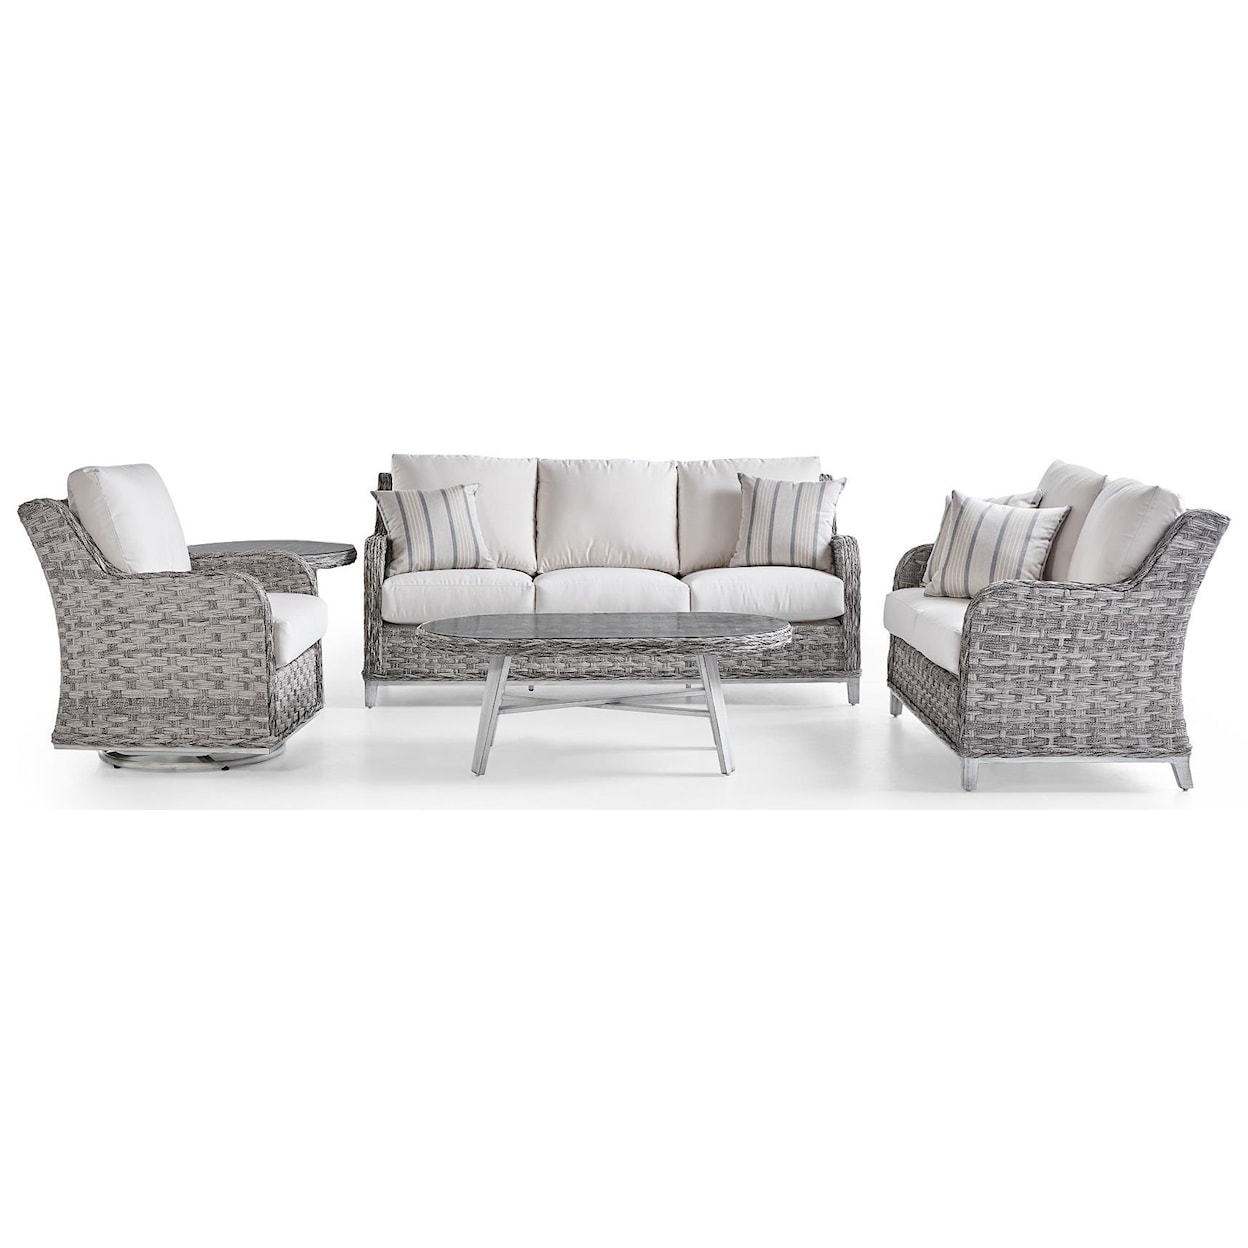 South Sea Outdoor Living Grand Isle OUTDOOR 5 PIECE SET